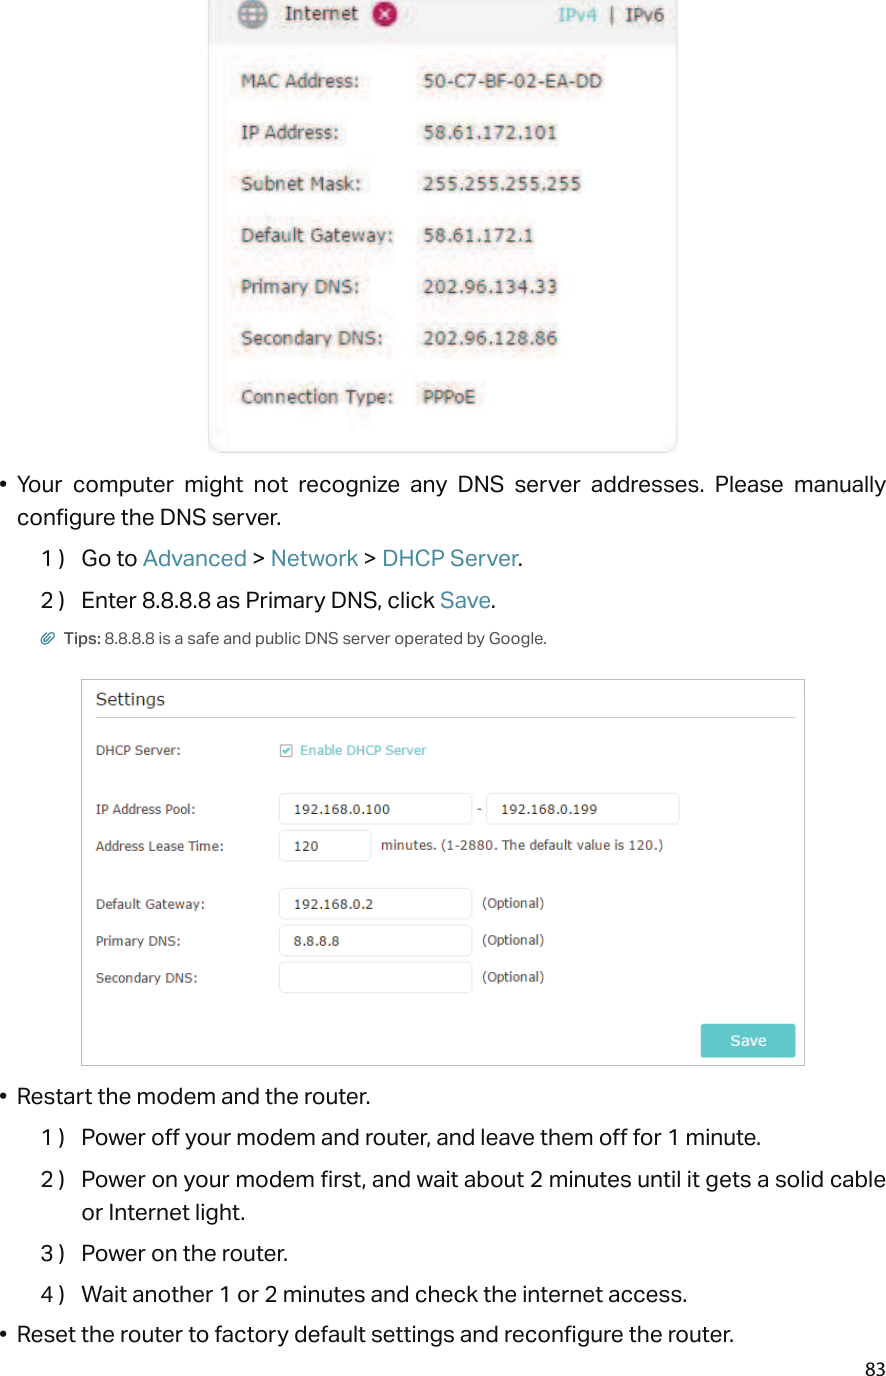 83•  Your  computer  might  not  recognize  any  DNS  server  addresses.  Please  manually configure the DNS server.1 )  Go to Advanced &gt; Network &gt; DHCP Server.2 )  Enter 8.8.8.8 as Primary DNS, click Save. Tips: 8.8.8.8 is a safe and public DNS server operated by Google.•  Restart the modem and the router.1 )  Power off your modem and router, and leave them off for 1 minute.2 )  Power on your modem first, and wait about 2 minutes until it gets a solid cable or Internet light.3 )  Power on the router.4 )  Wait another 1 or 2 minutes and check the internet access.•  Reset the router to factory default settings and reconfigure the router.